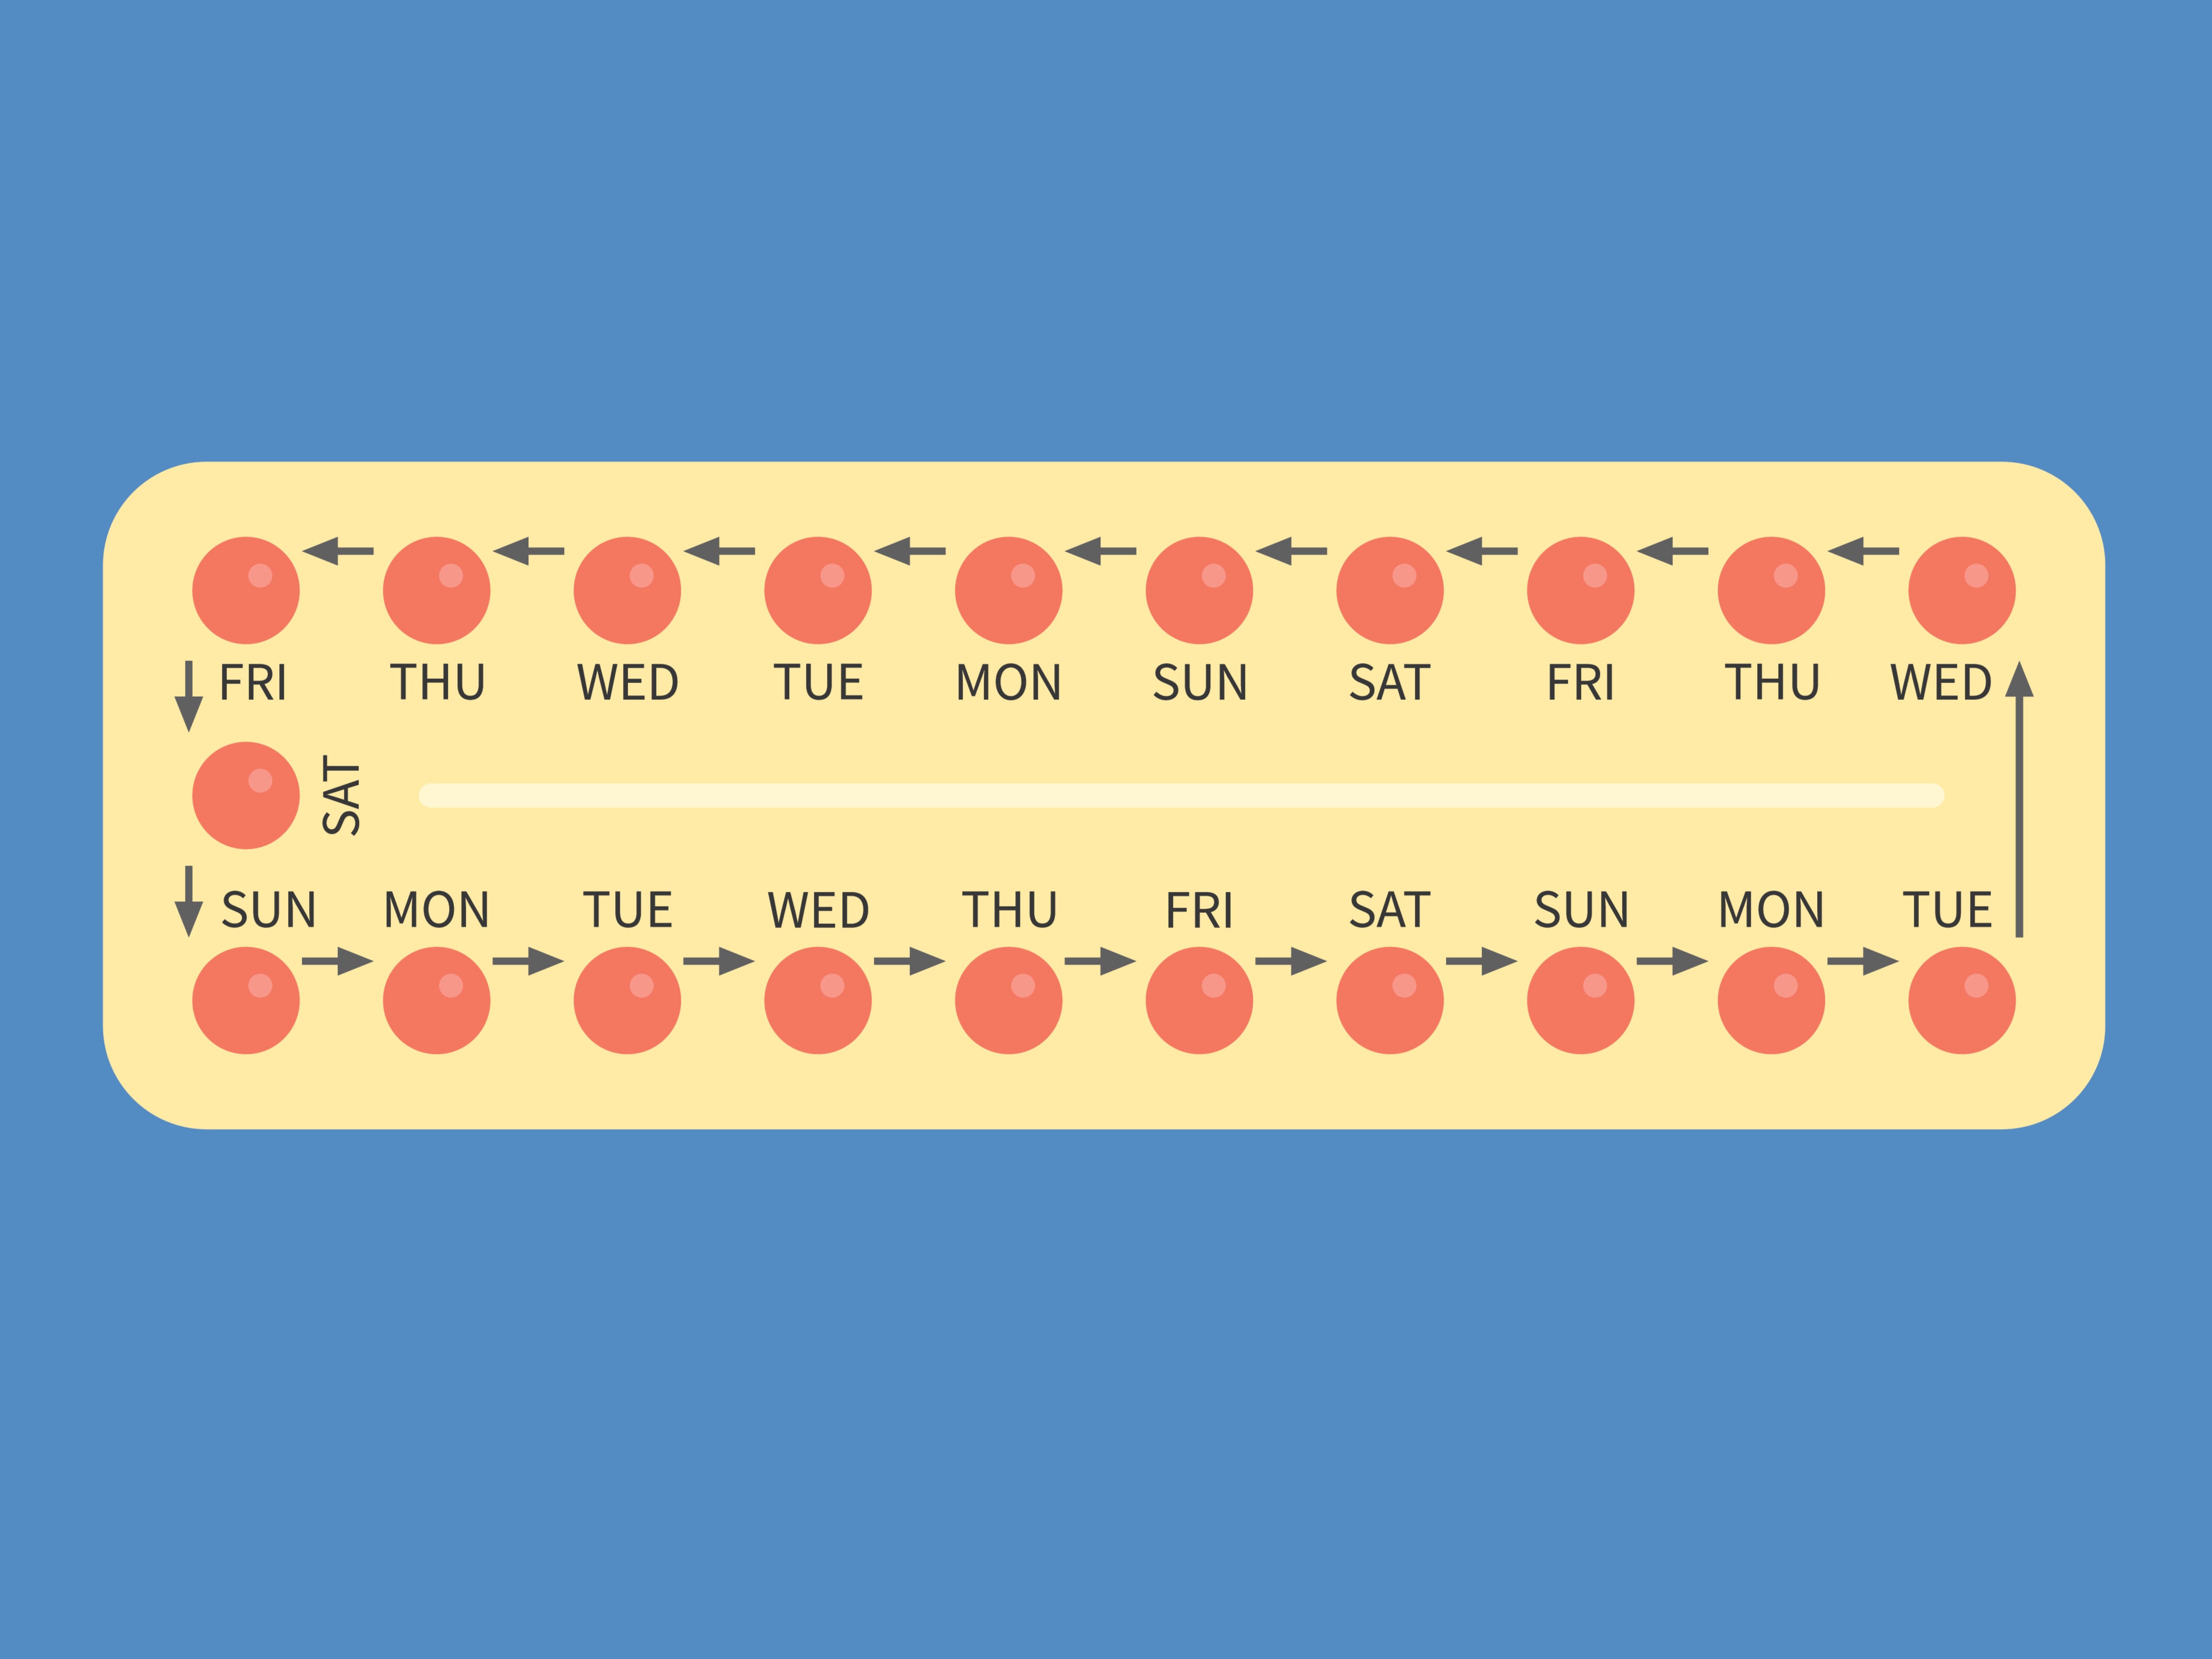 What Happens After You Stop Taking Birth Control? Mood Swings, Bleeding,  and Other Symptoms